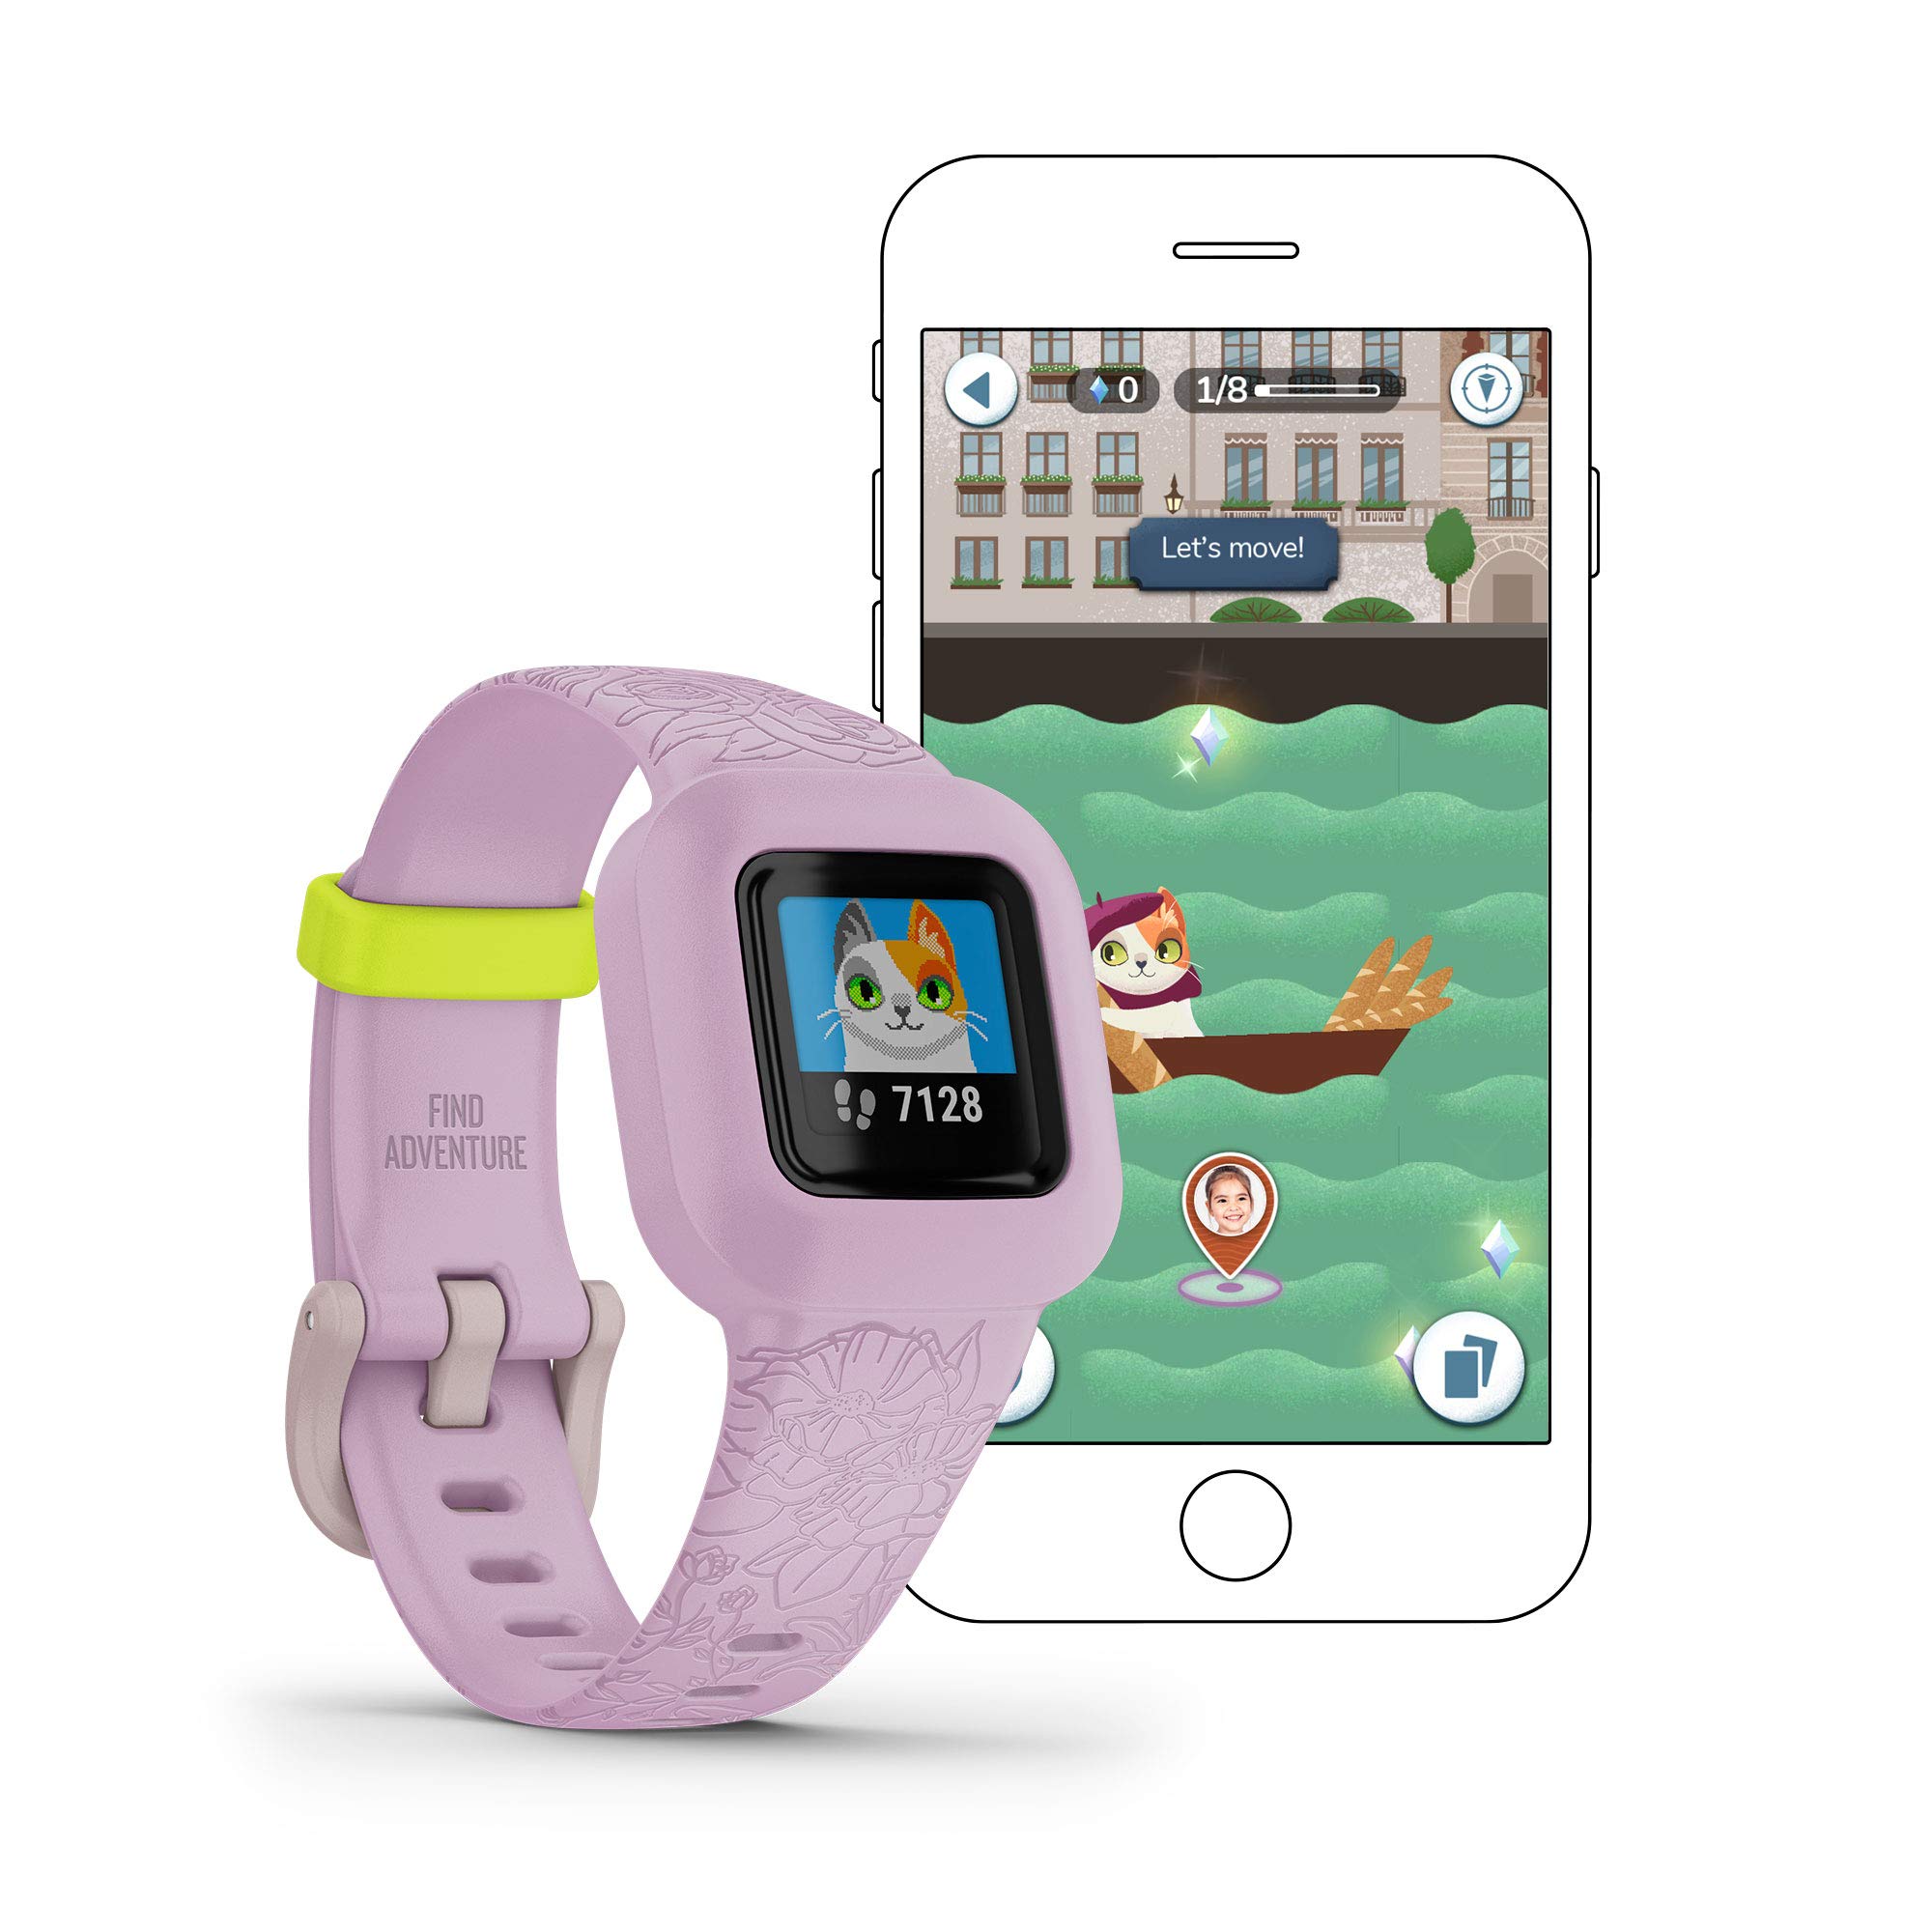 Garmin vivofit jr. 3, Fitness Tracker for Kids, Includes Interactive App Experience, Swim-Friendly, Up To 1-year Battery Life, Lilac Floral